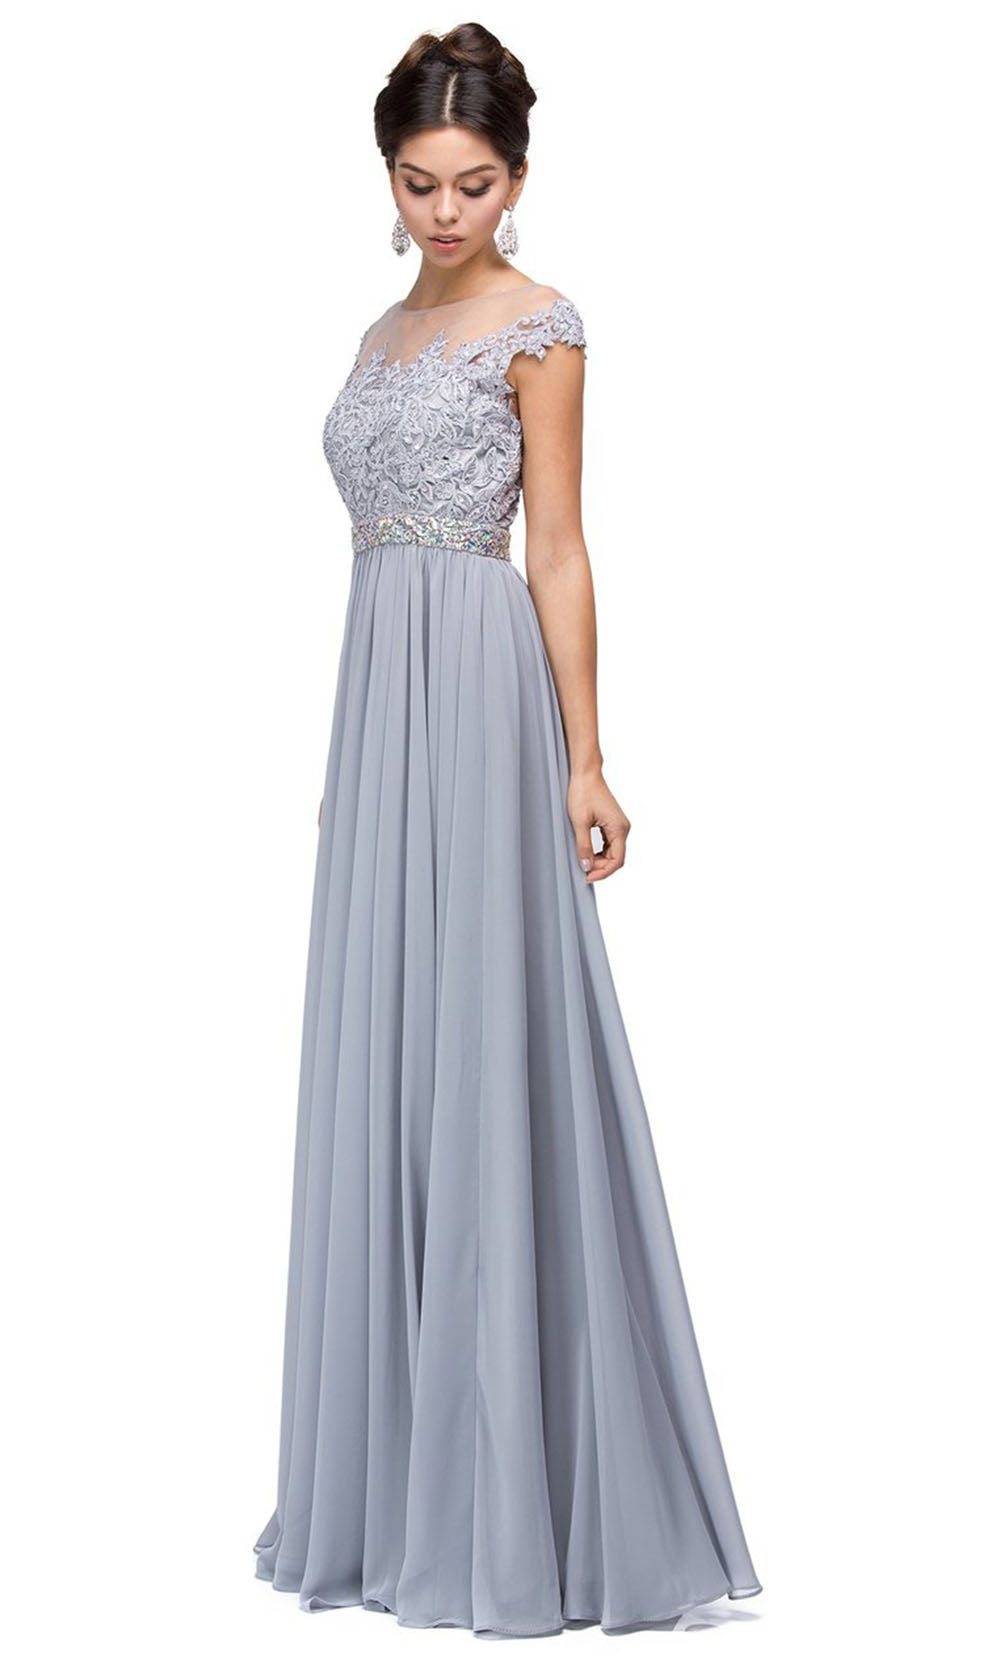 Dancing Queen - 9400 Beaded Lace Illusion Neckline A-Line Gown In Silver & Gray